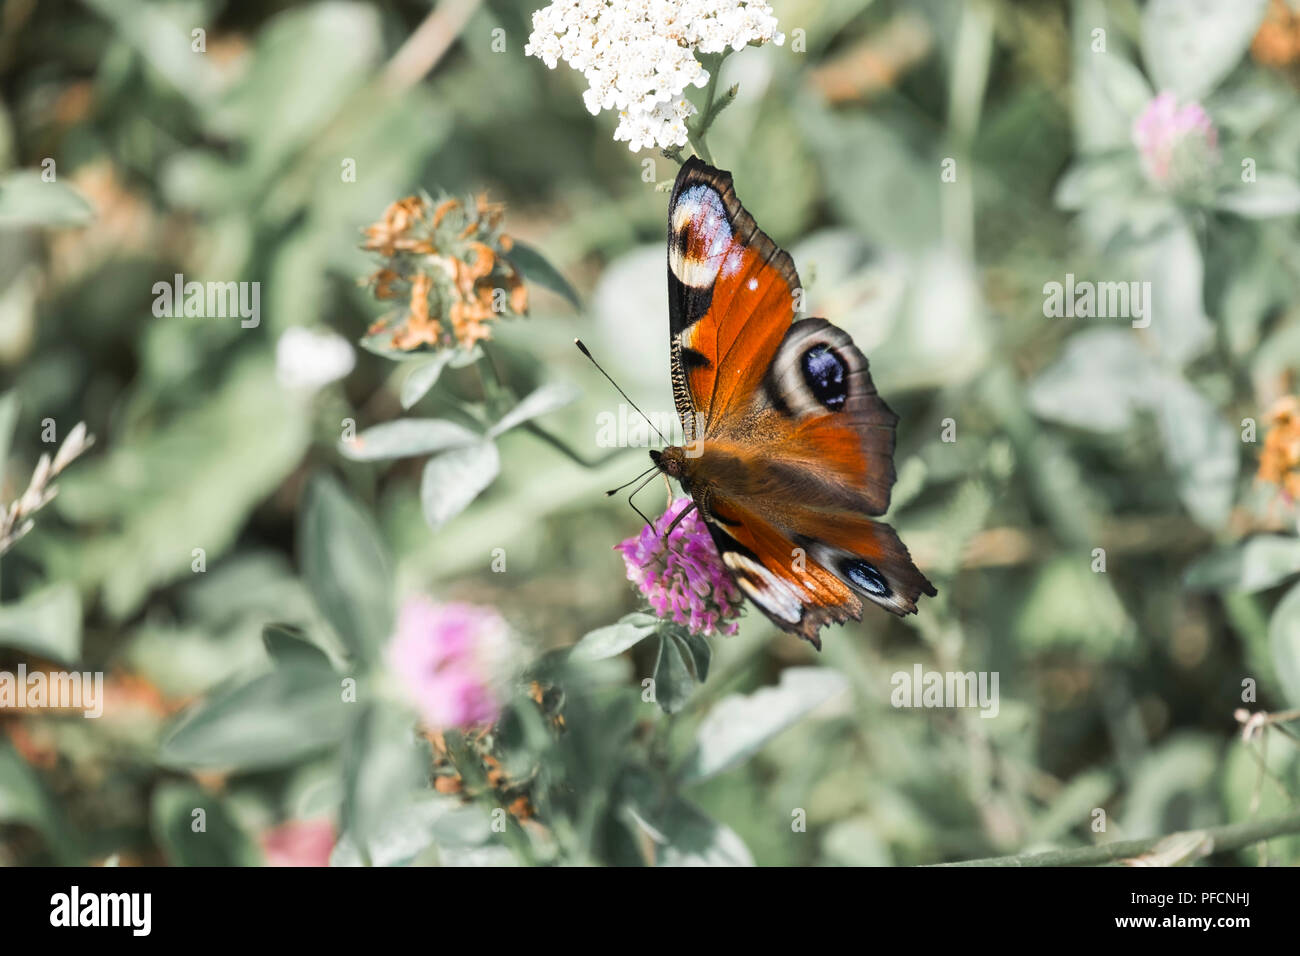 Peacock butterfly extracts the nectar from the flower of the clover (Aglais io) Stock Photo